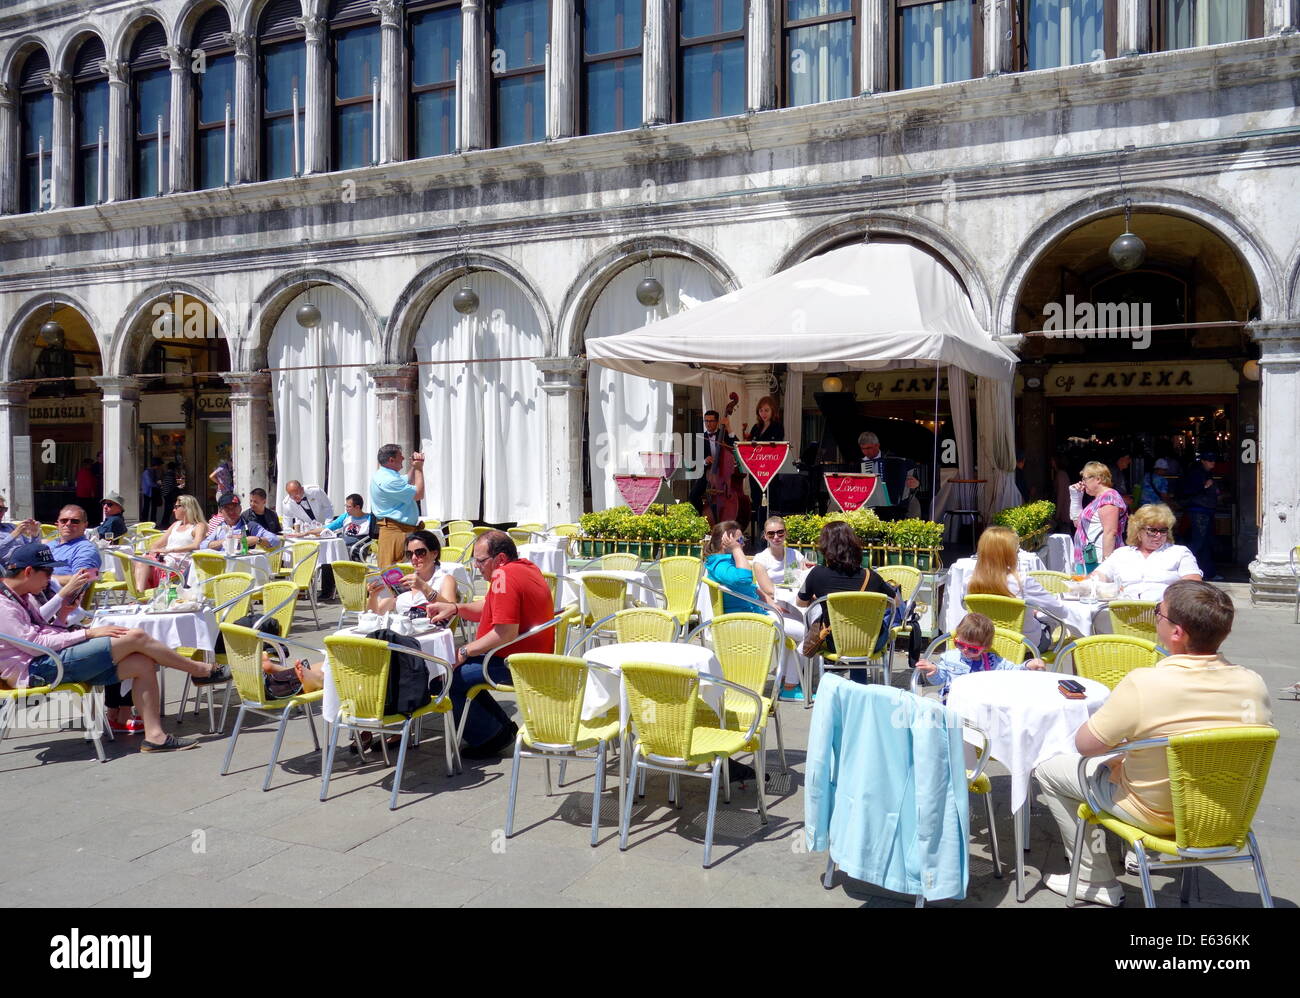 Tourists chilling at a cafe in San Marco Square in Venice, Italy Stock Photo